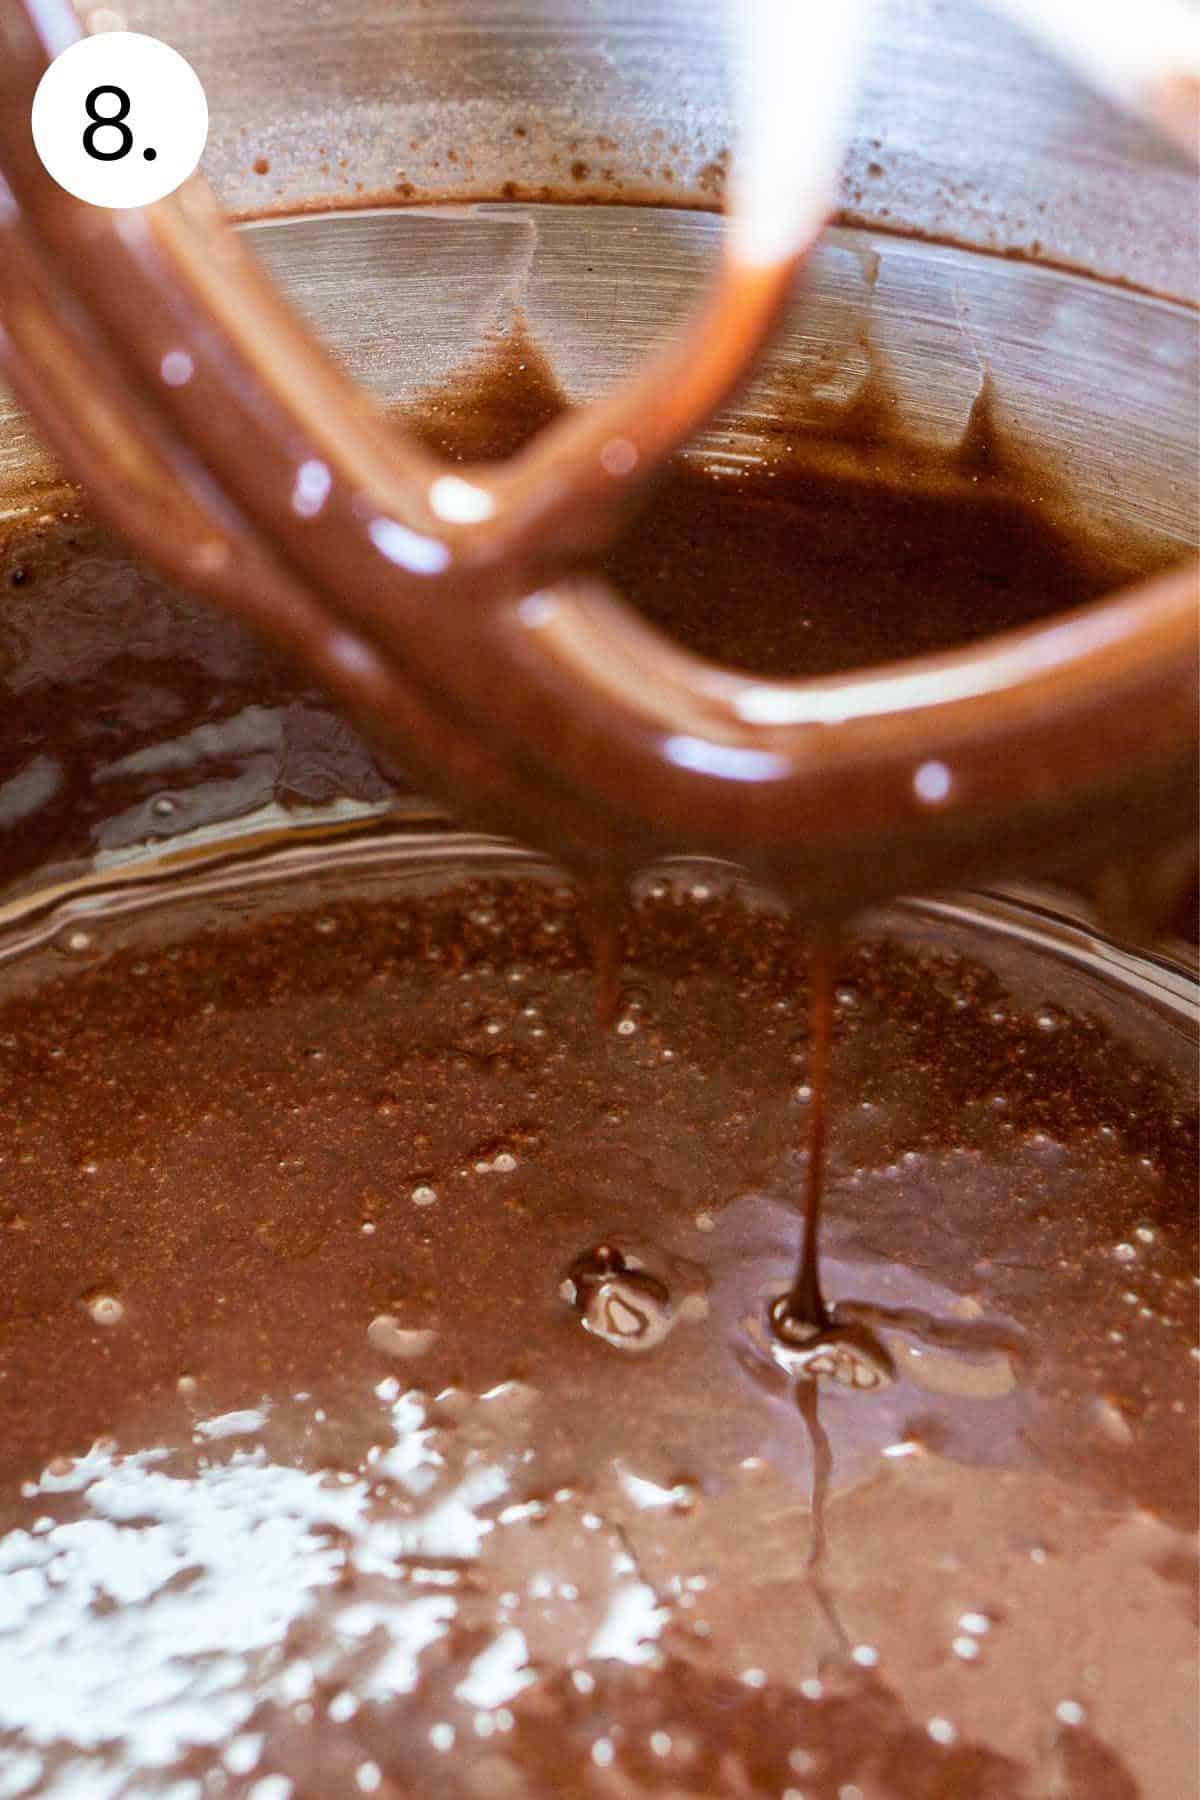 The thin batter drizzling off the beater into the mixing bowl.